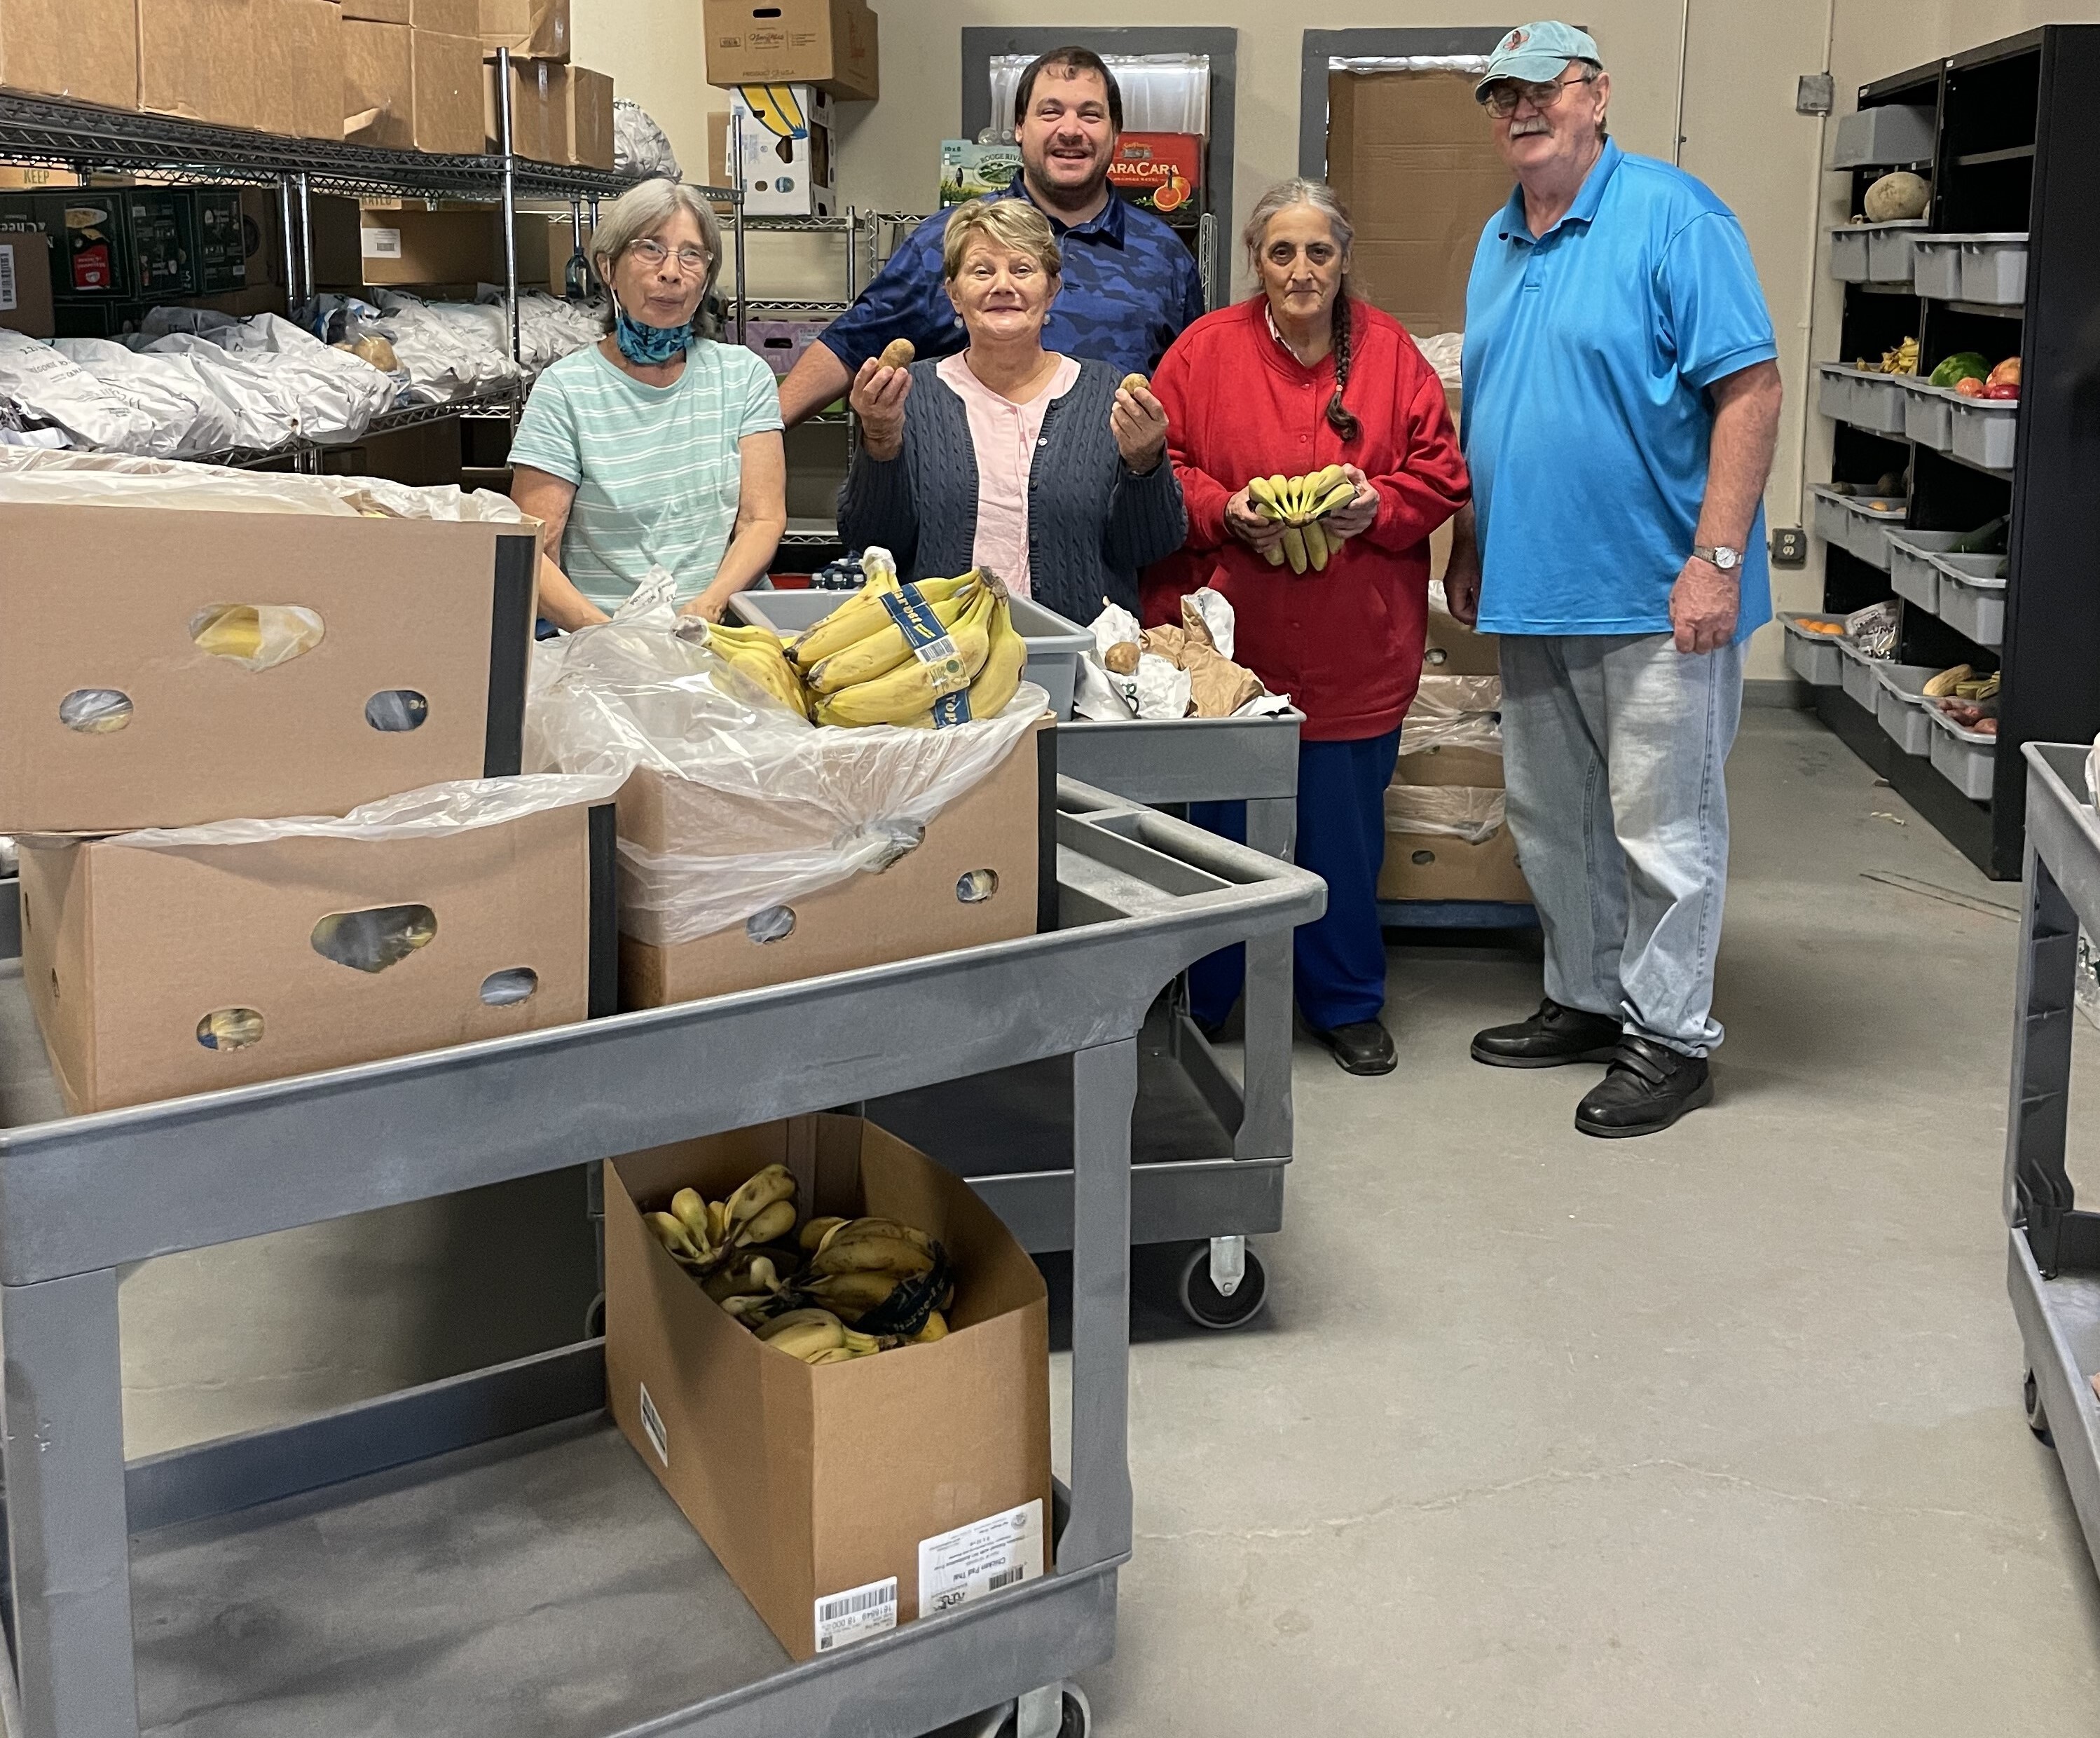 Food Pantry Run by Abenaki Nation of Missisquoi Receives Grant from VEC Community Fund